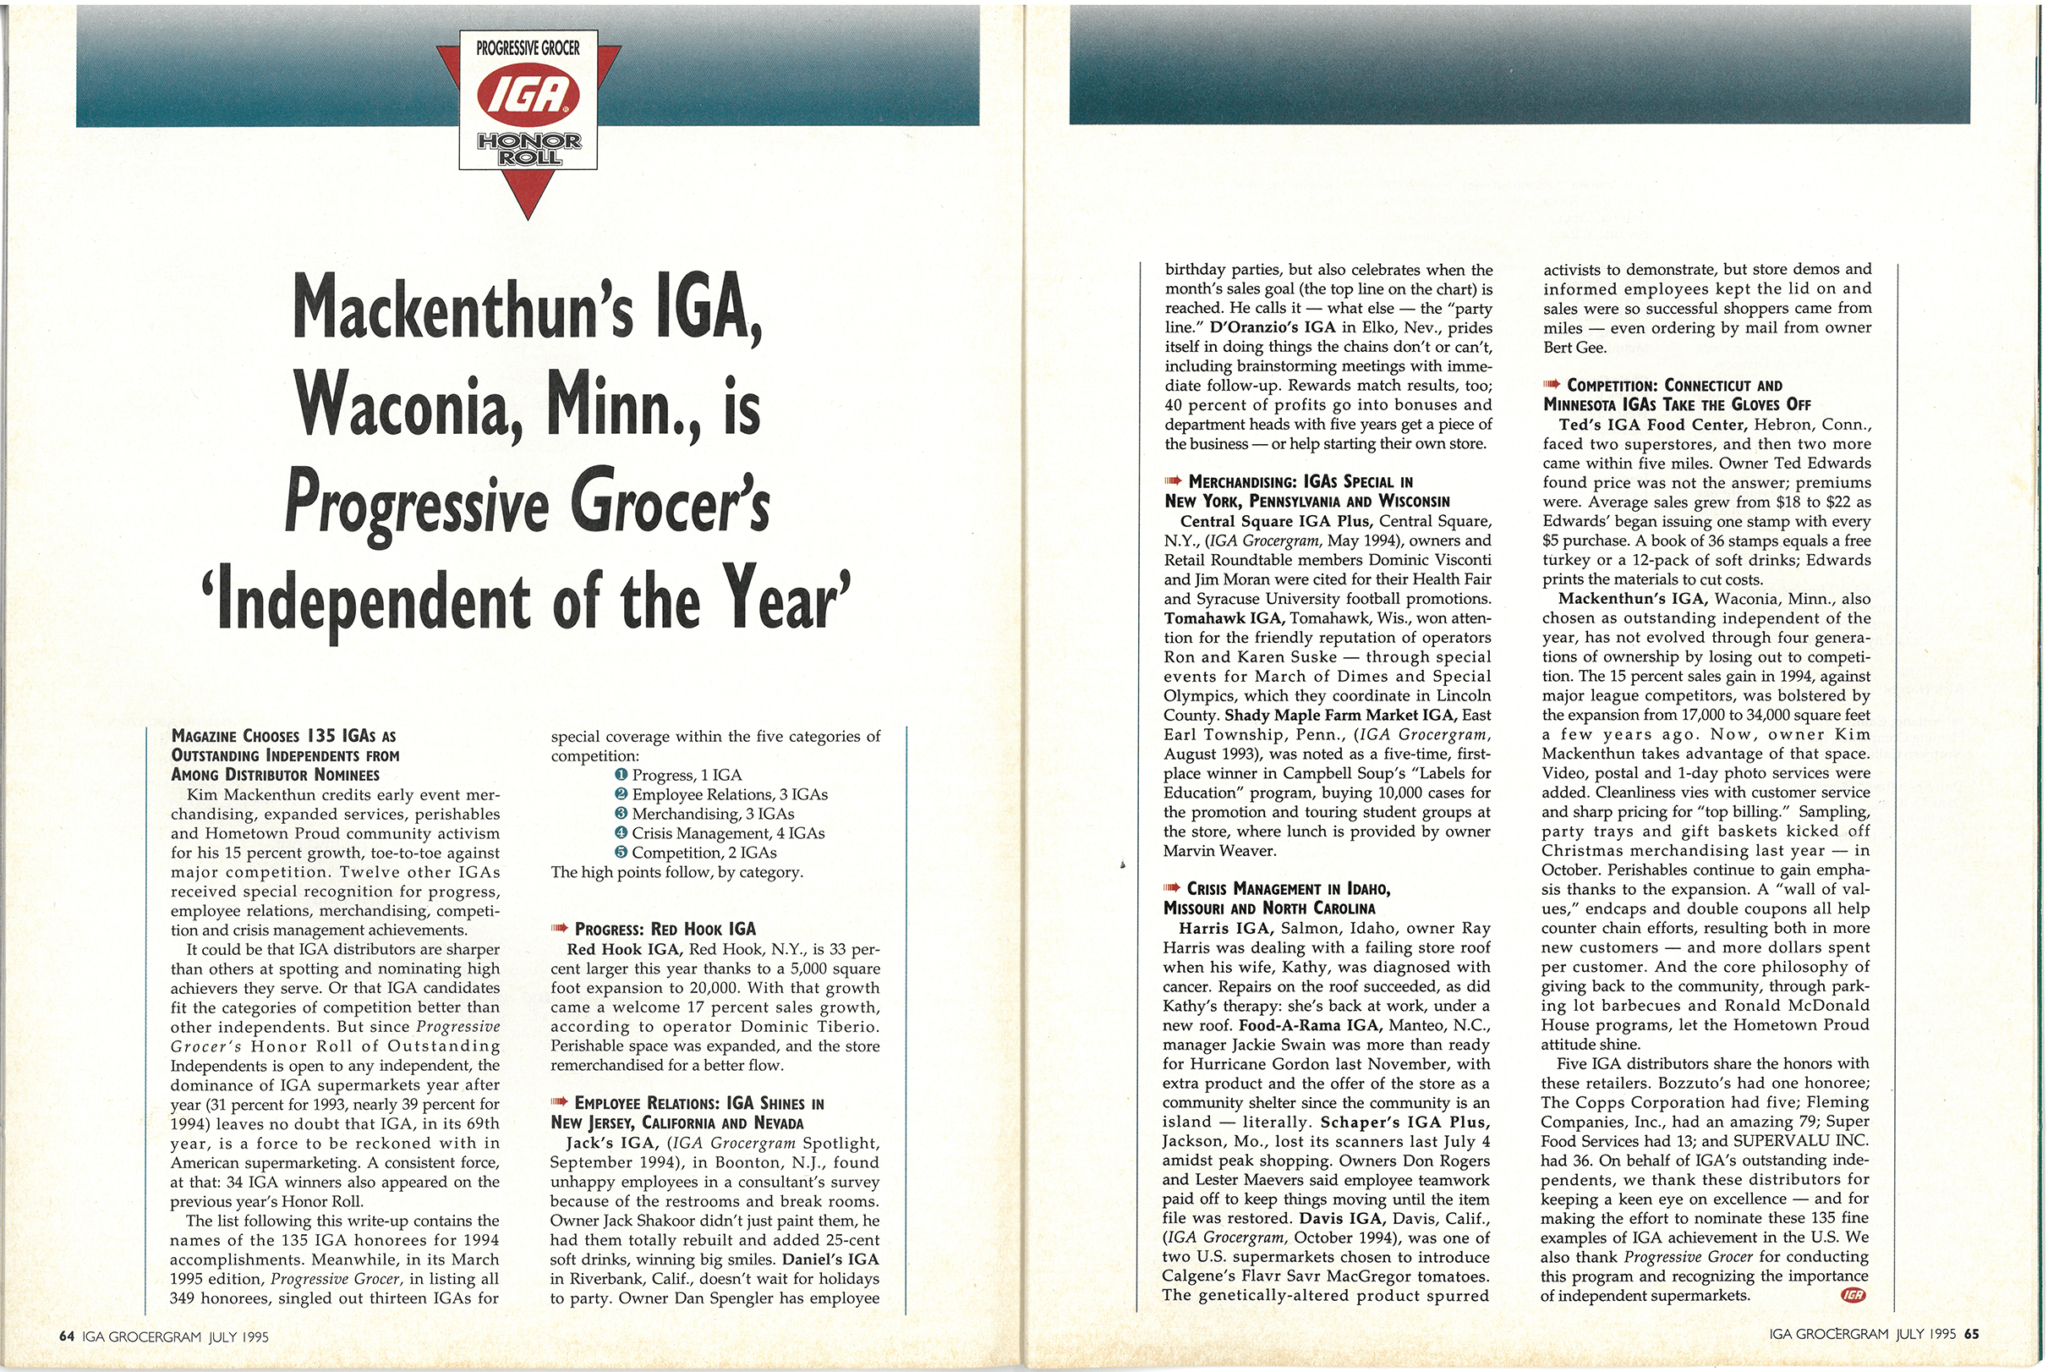 1995 Progressive Grocer's Independent of the Year